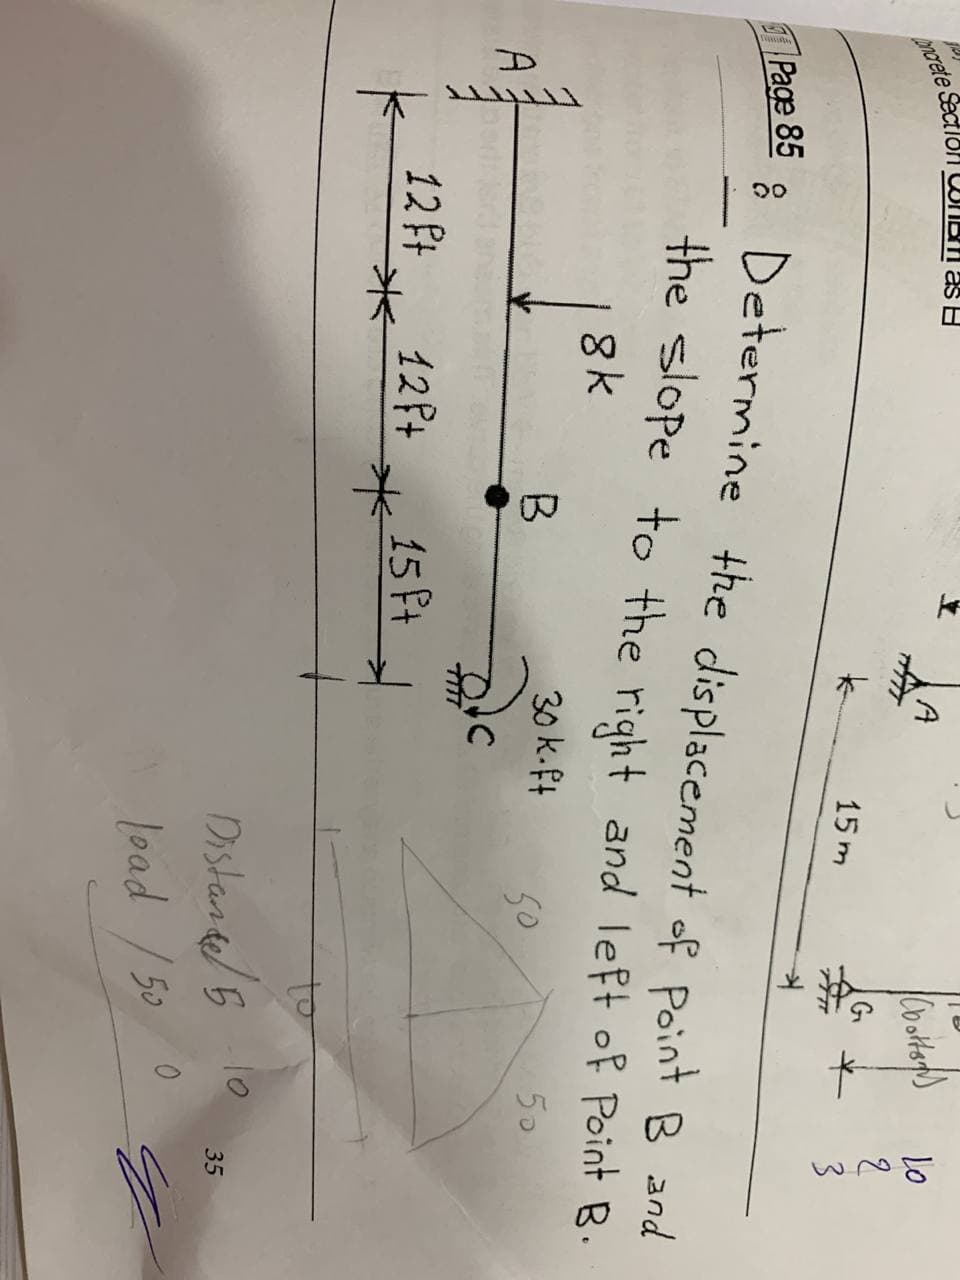 Concrete Section as
Page 85
A
A
(bottom)
Lo
2
15m
3
: Determine the displacement of Point B and
the slope to the right and left of Point B.
8k
B
30 k-ft
50
50
12 ft
Distance 5-10
load /50
TTTTTTT
12P+
15 ft
35